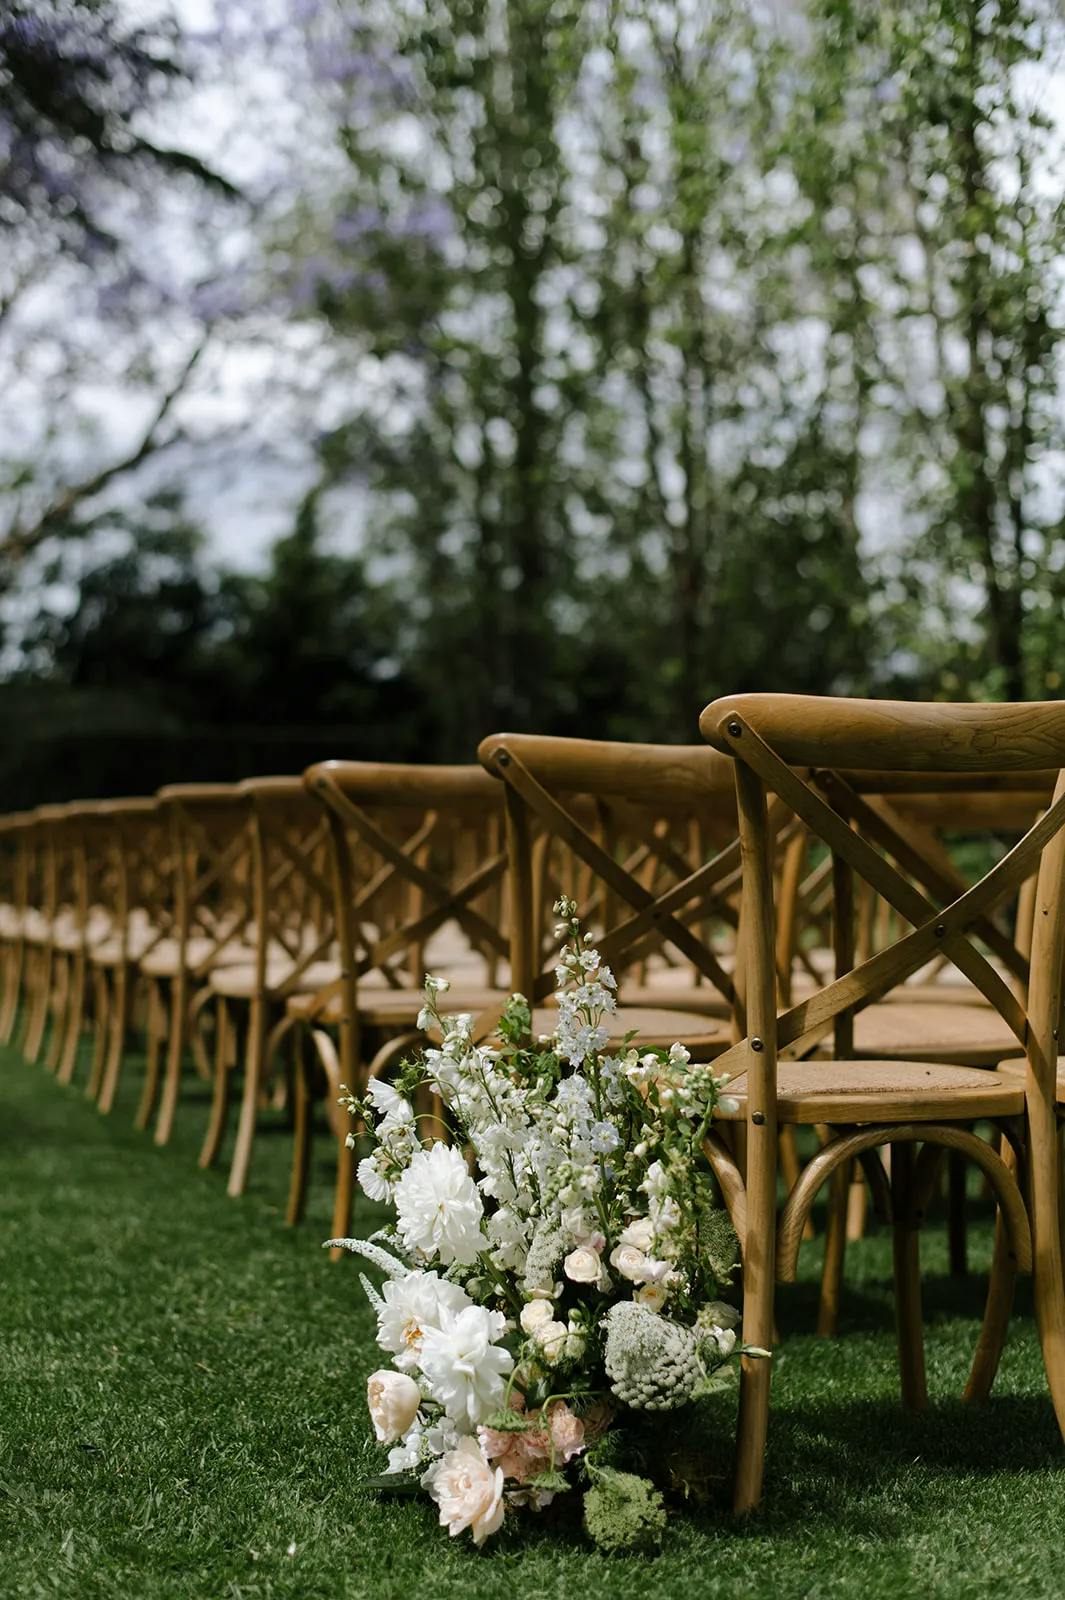 A row of wooden chairs with crossed backs is set up outdoors on a grassy lawn. The chairs are aligned neatly, and the area is decorated with white and green floral arrangements. Trees and a purple-hued sky can be seen in the background, giving a serene atmosphere.